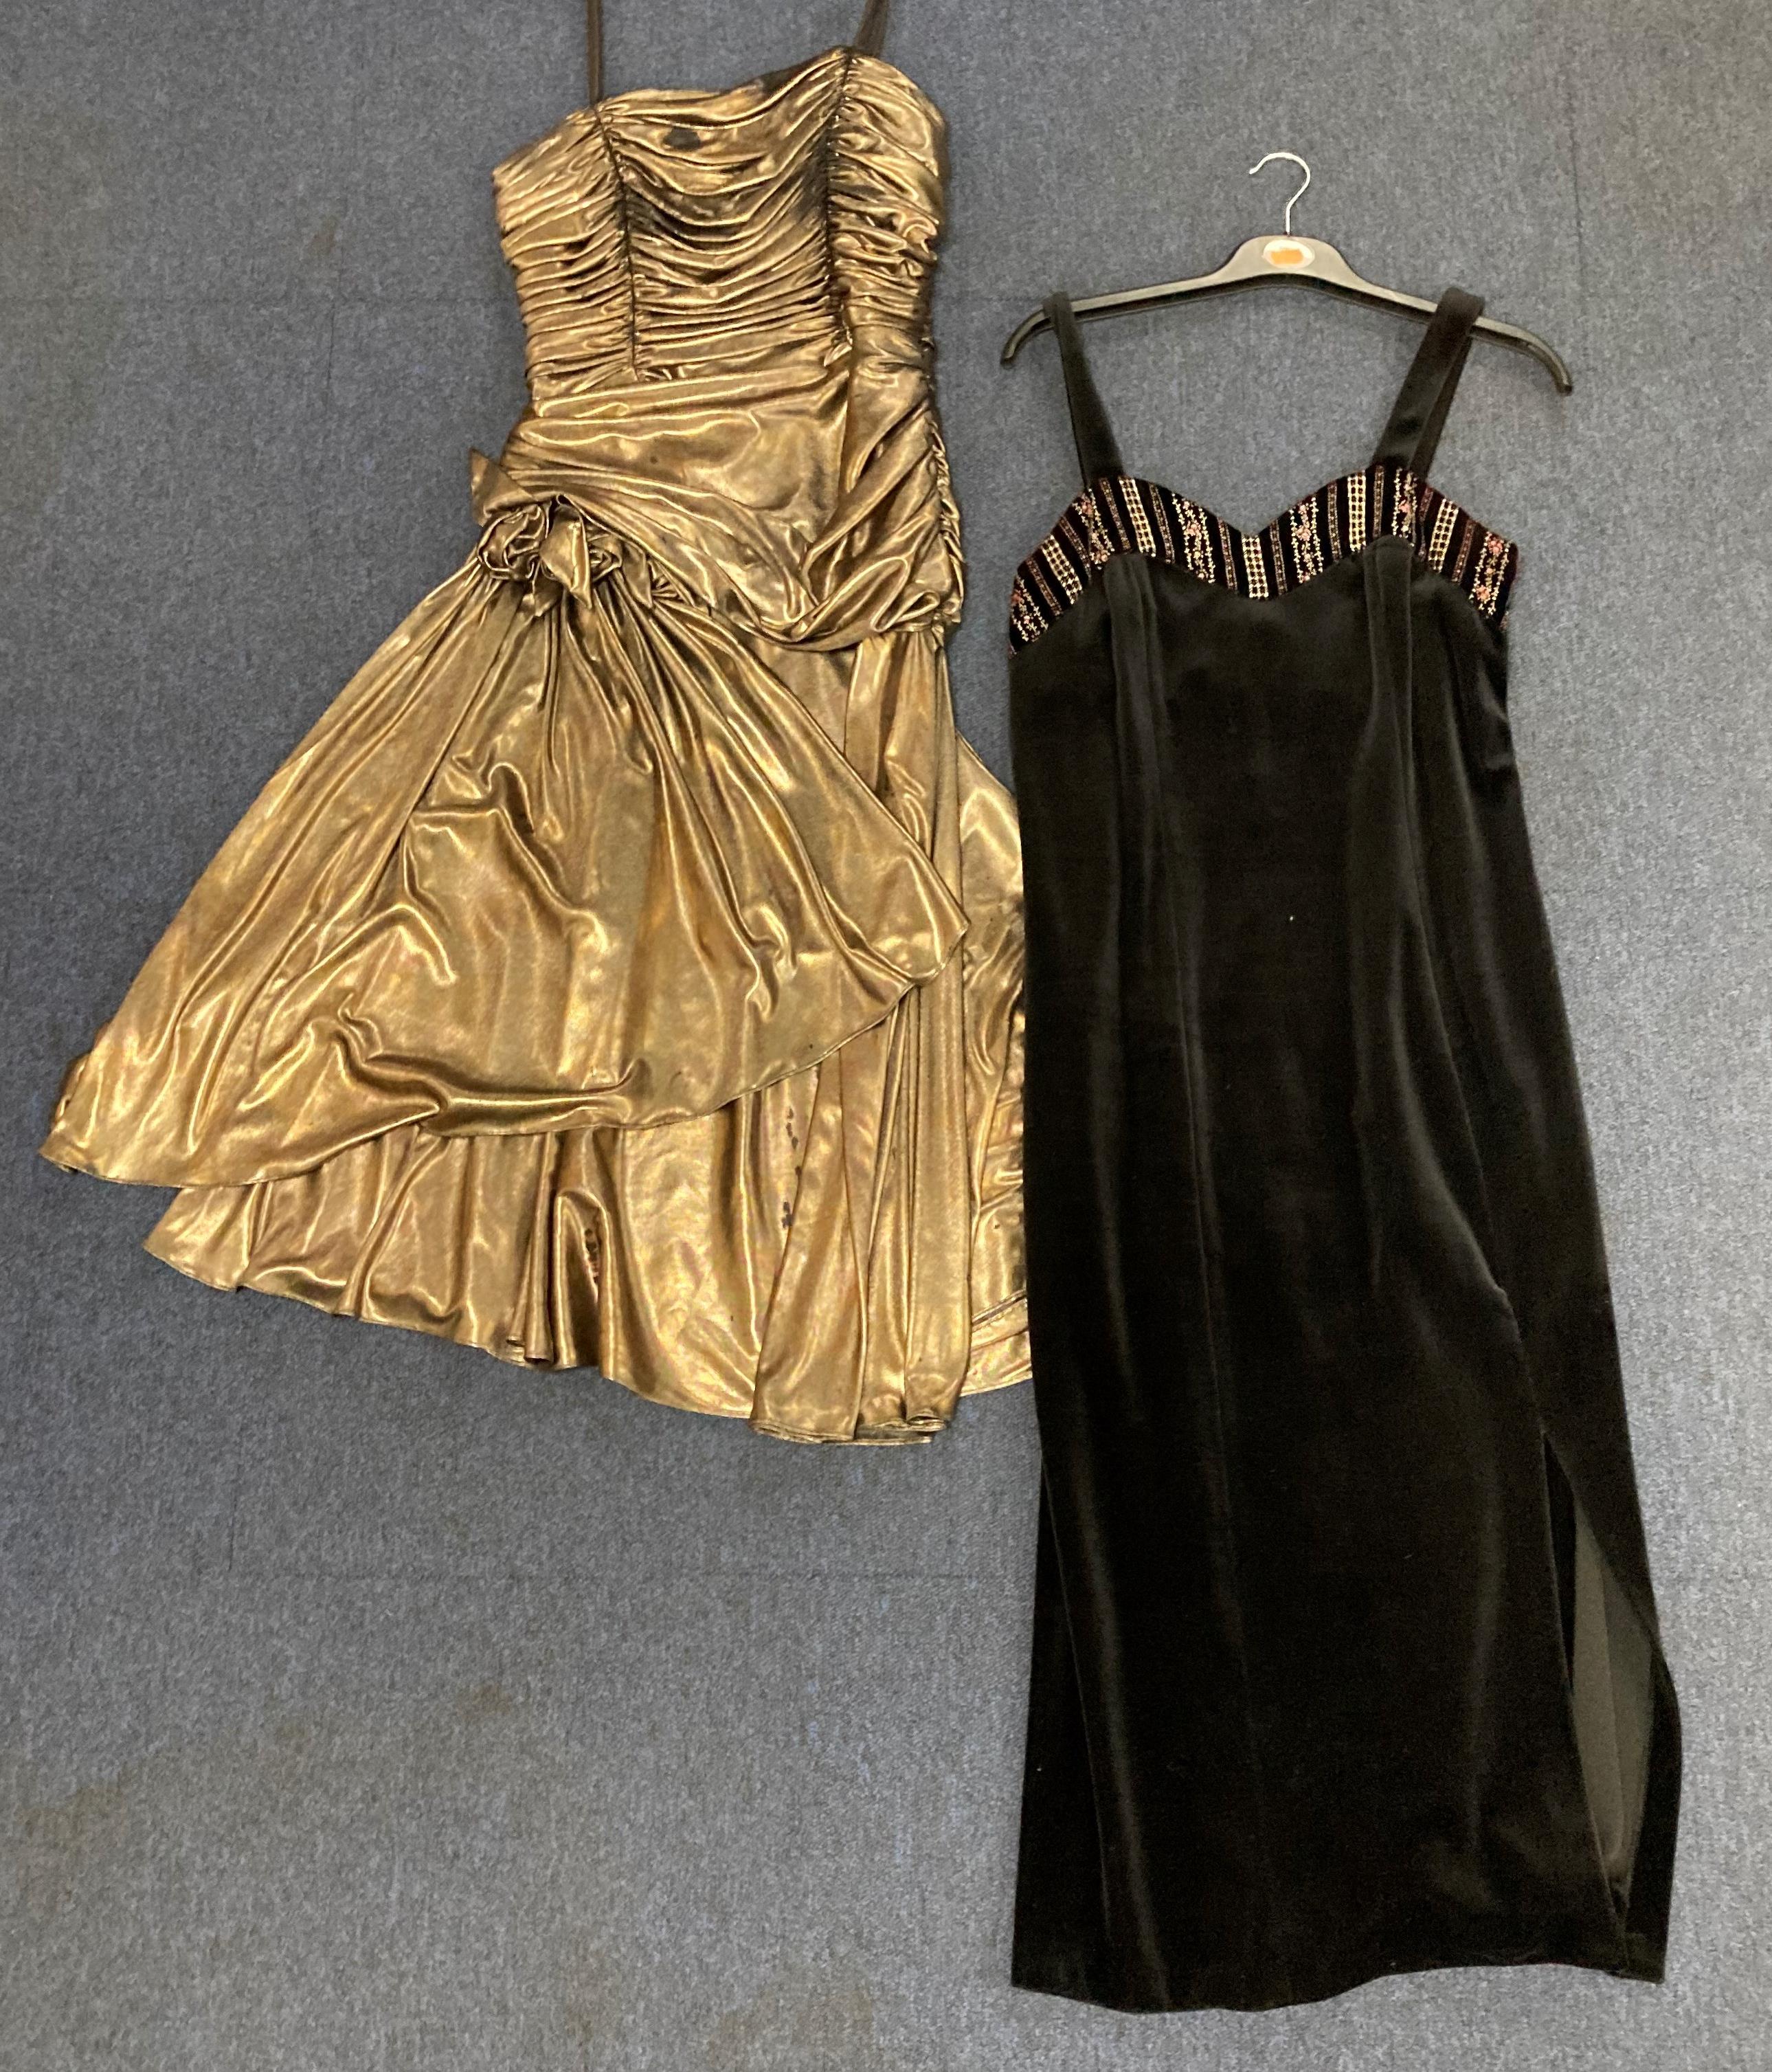 Two vintage dresses -sizes unknown- including one gold-tone waterfall effect dress with fabric